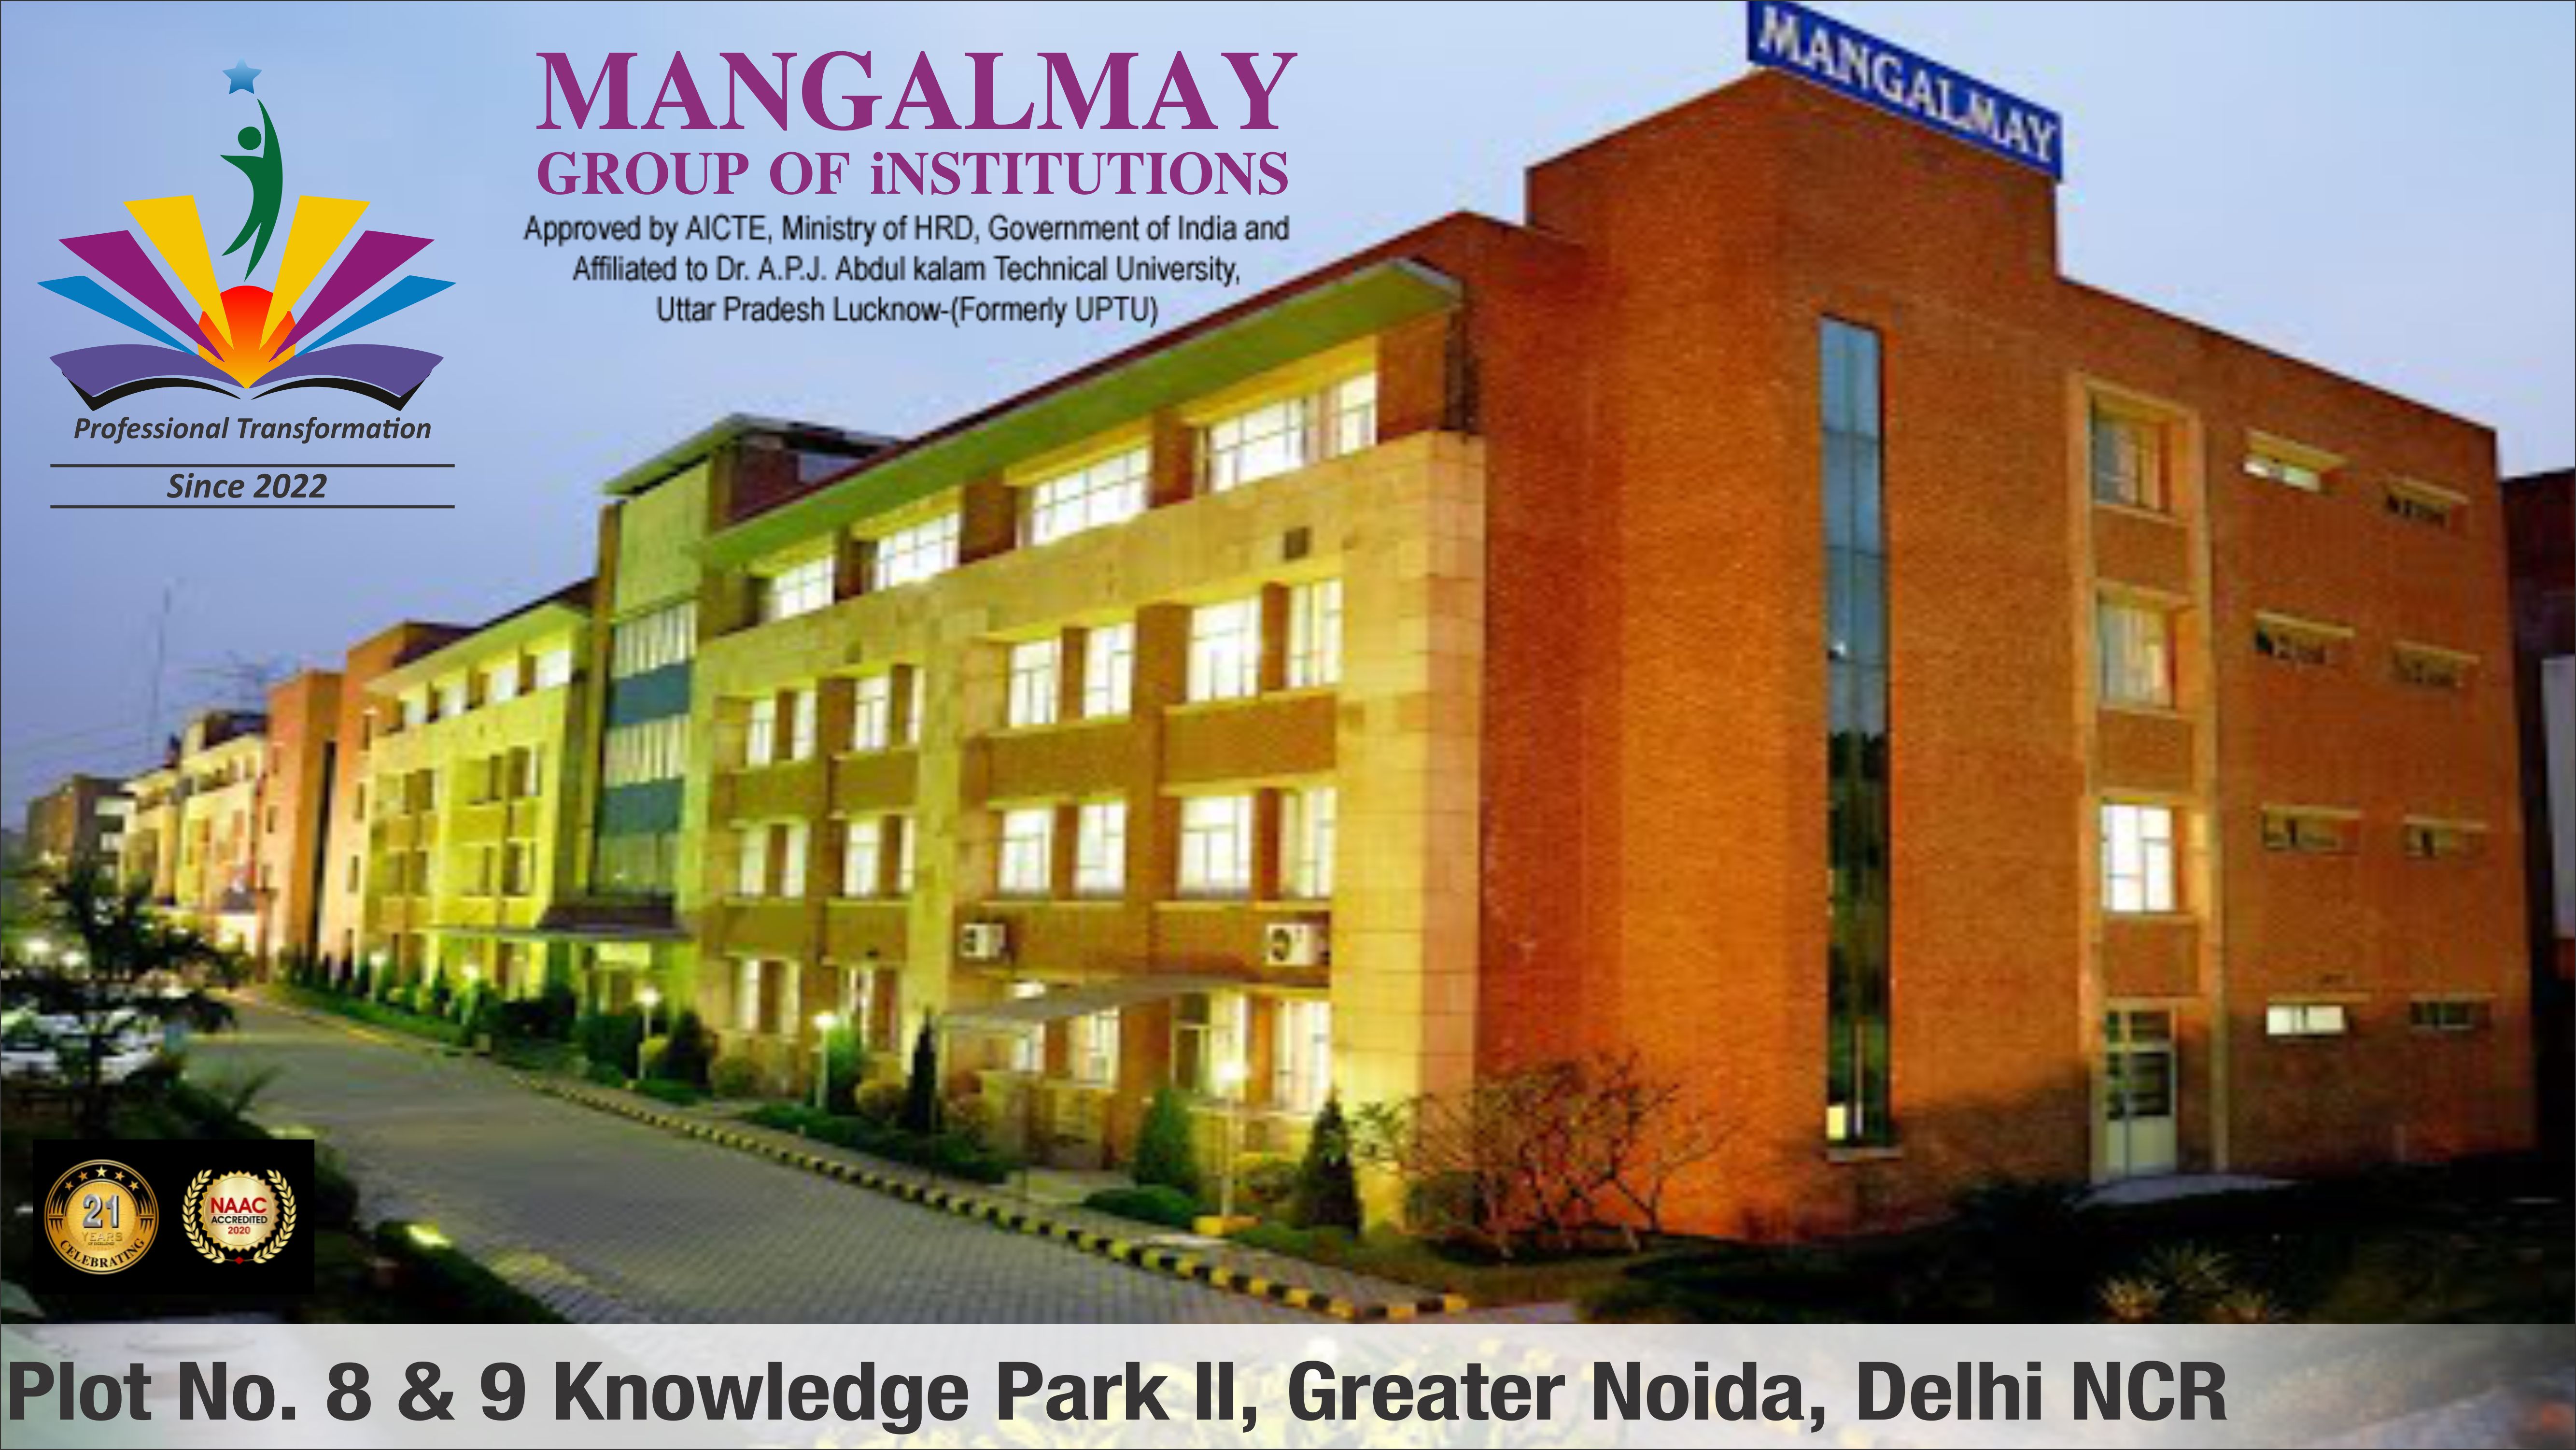 Out Side View of Mangalmay Group Of Institutions